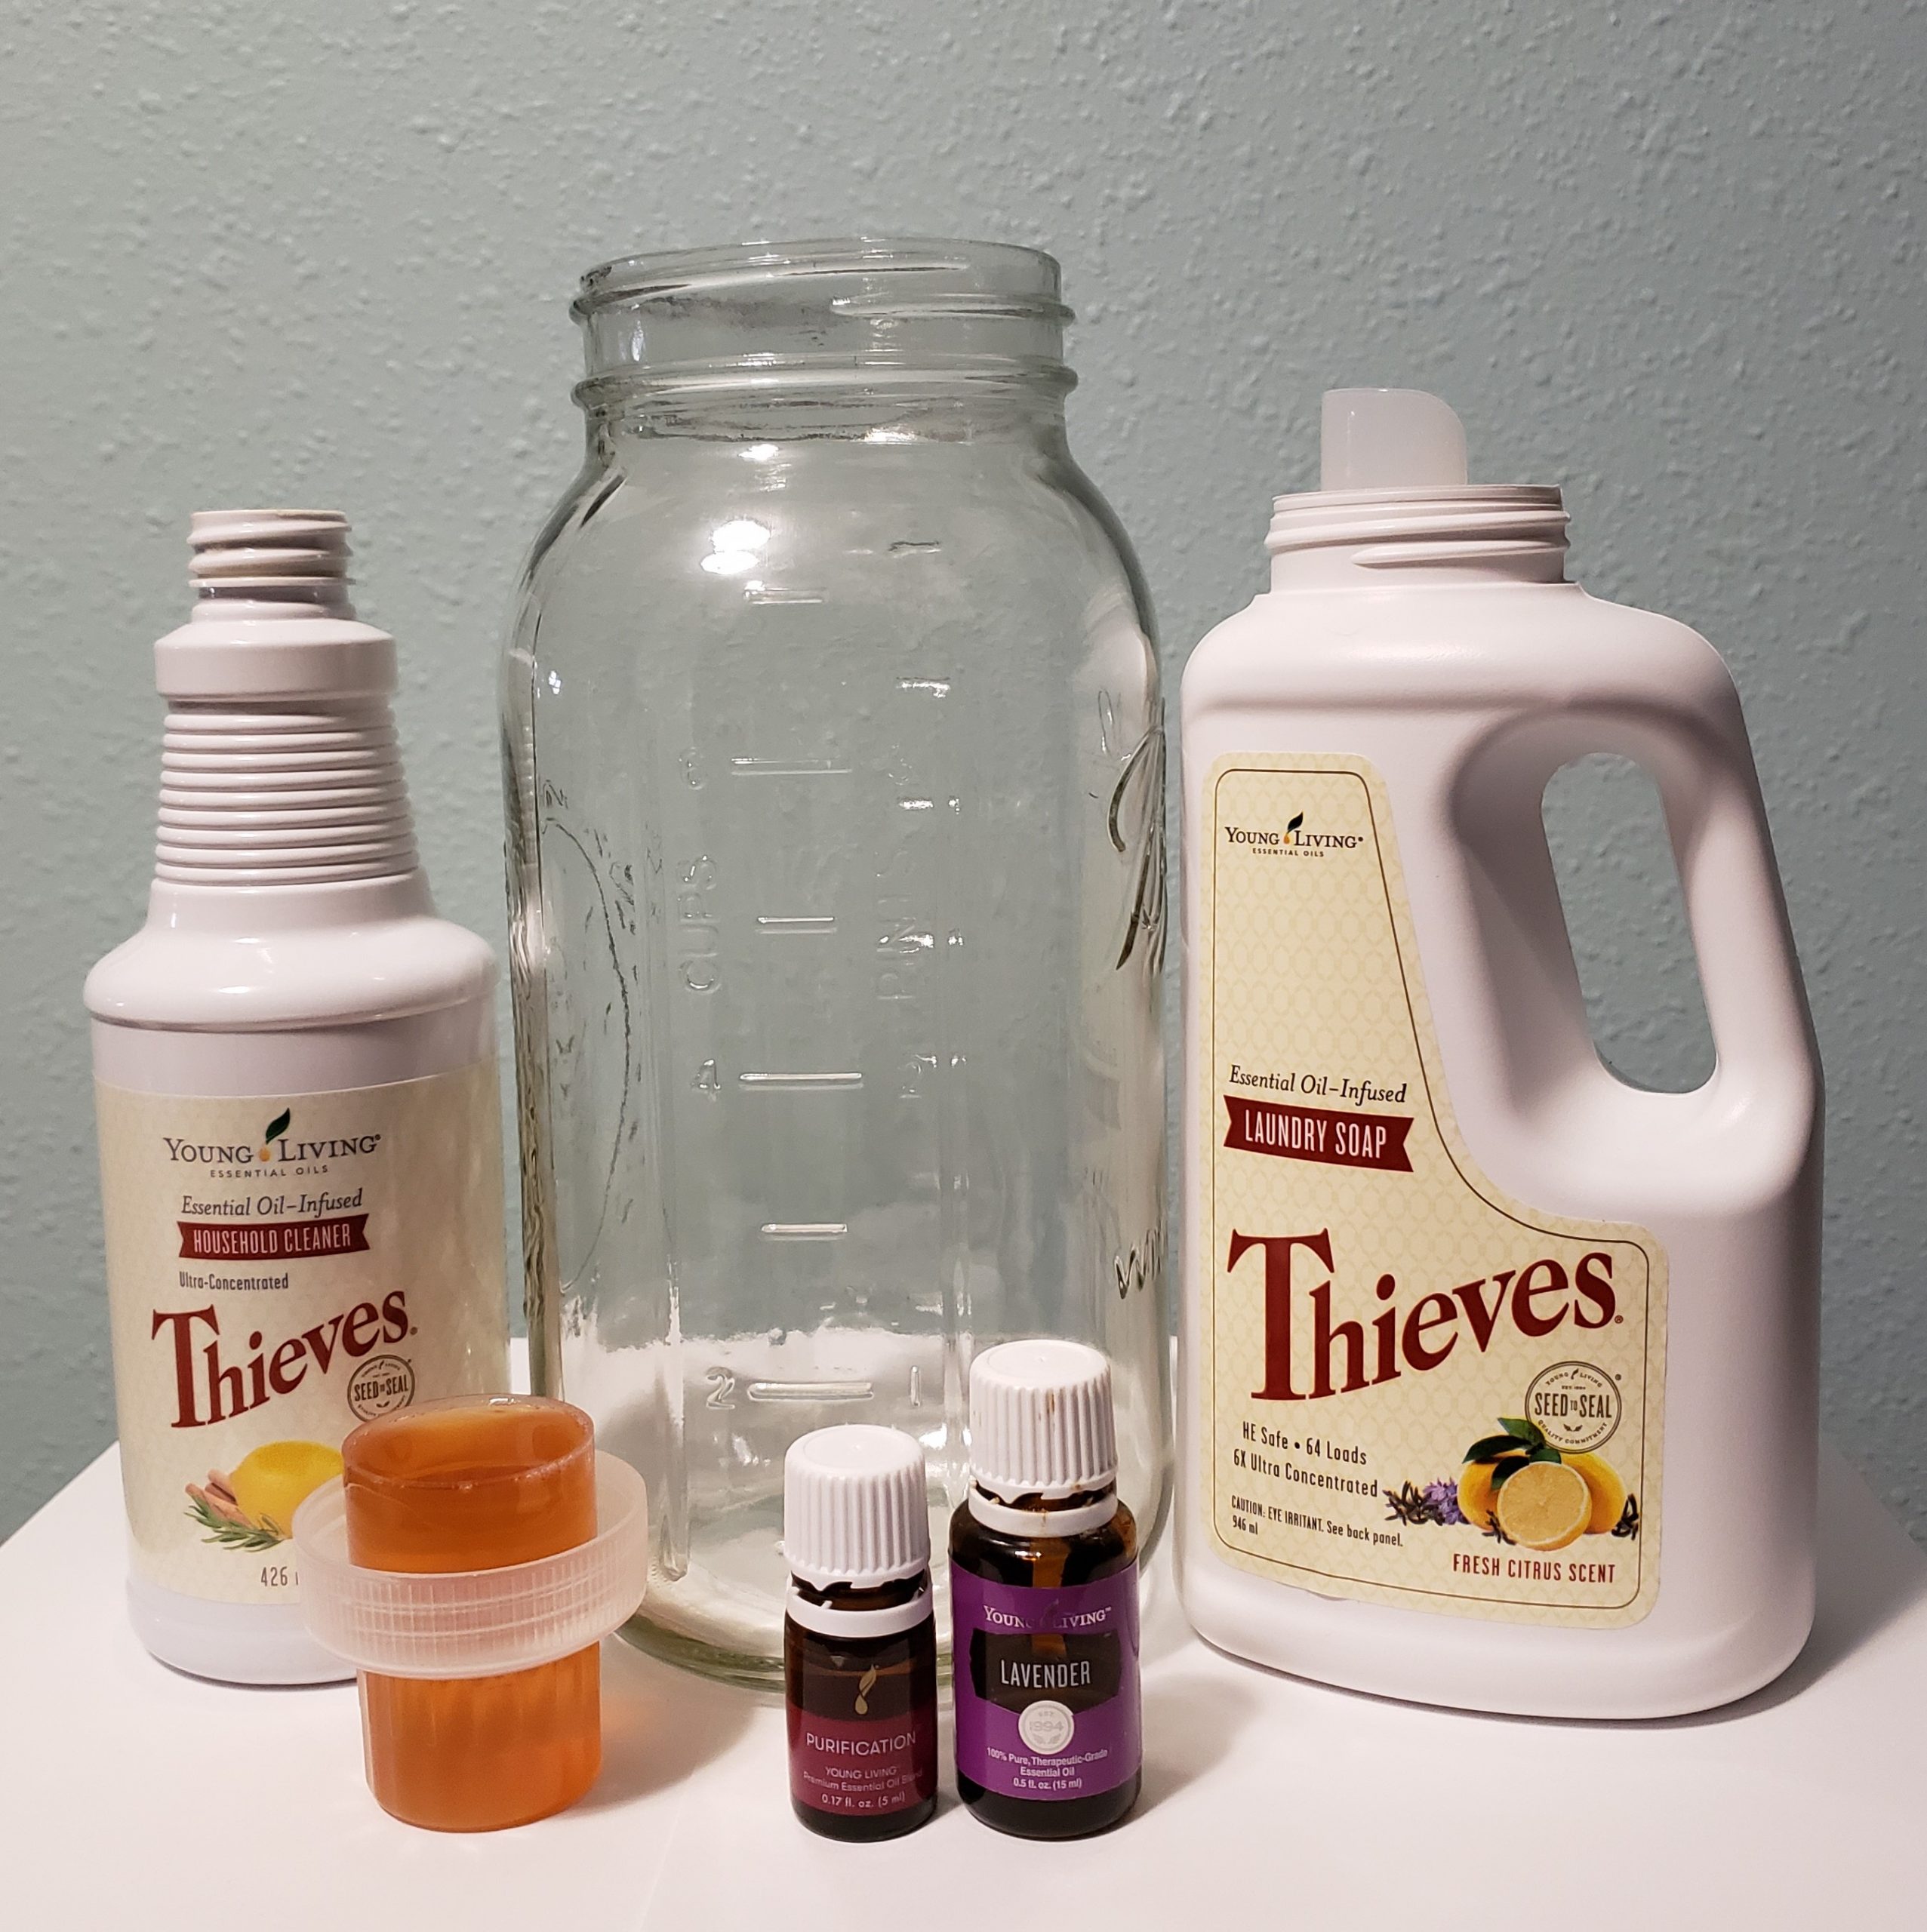 young living thieves household cleaner large glass jar thieve laundry soap cap of cleaner purification blend and lavender essential oil